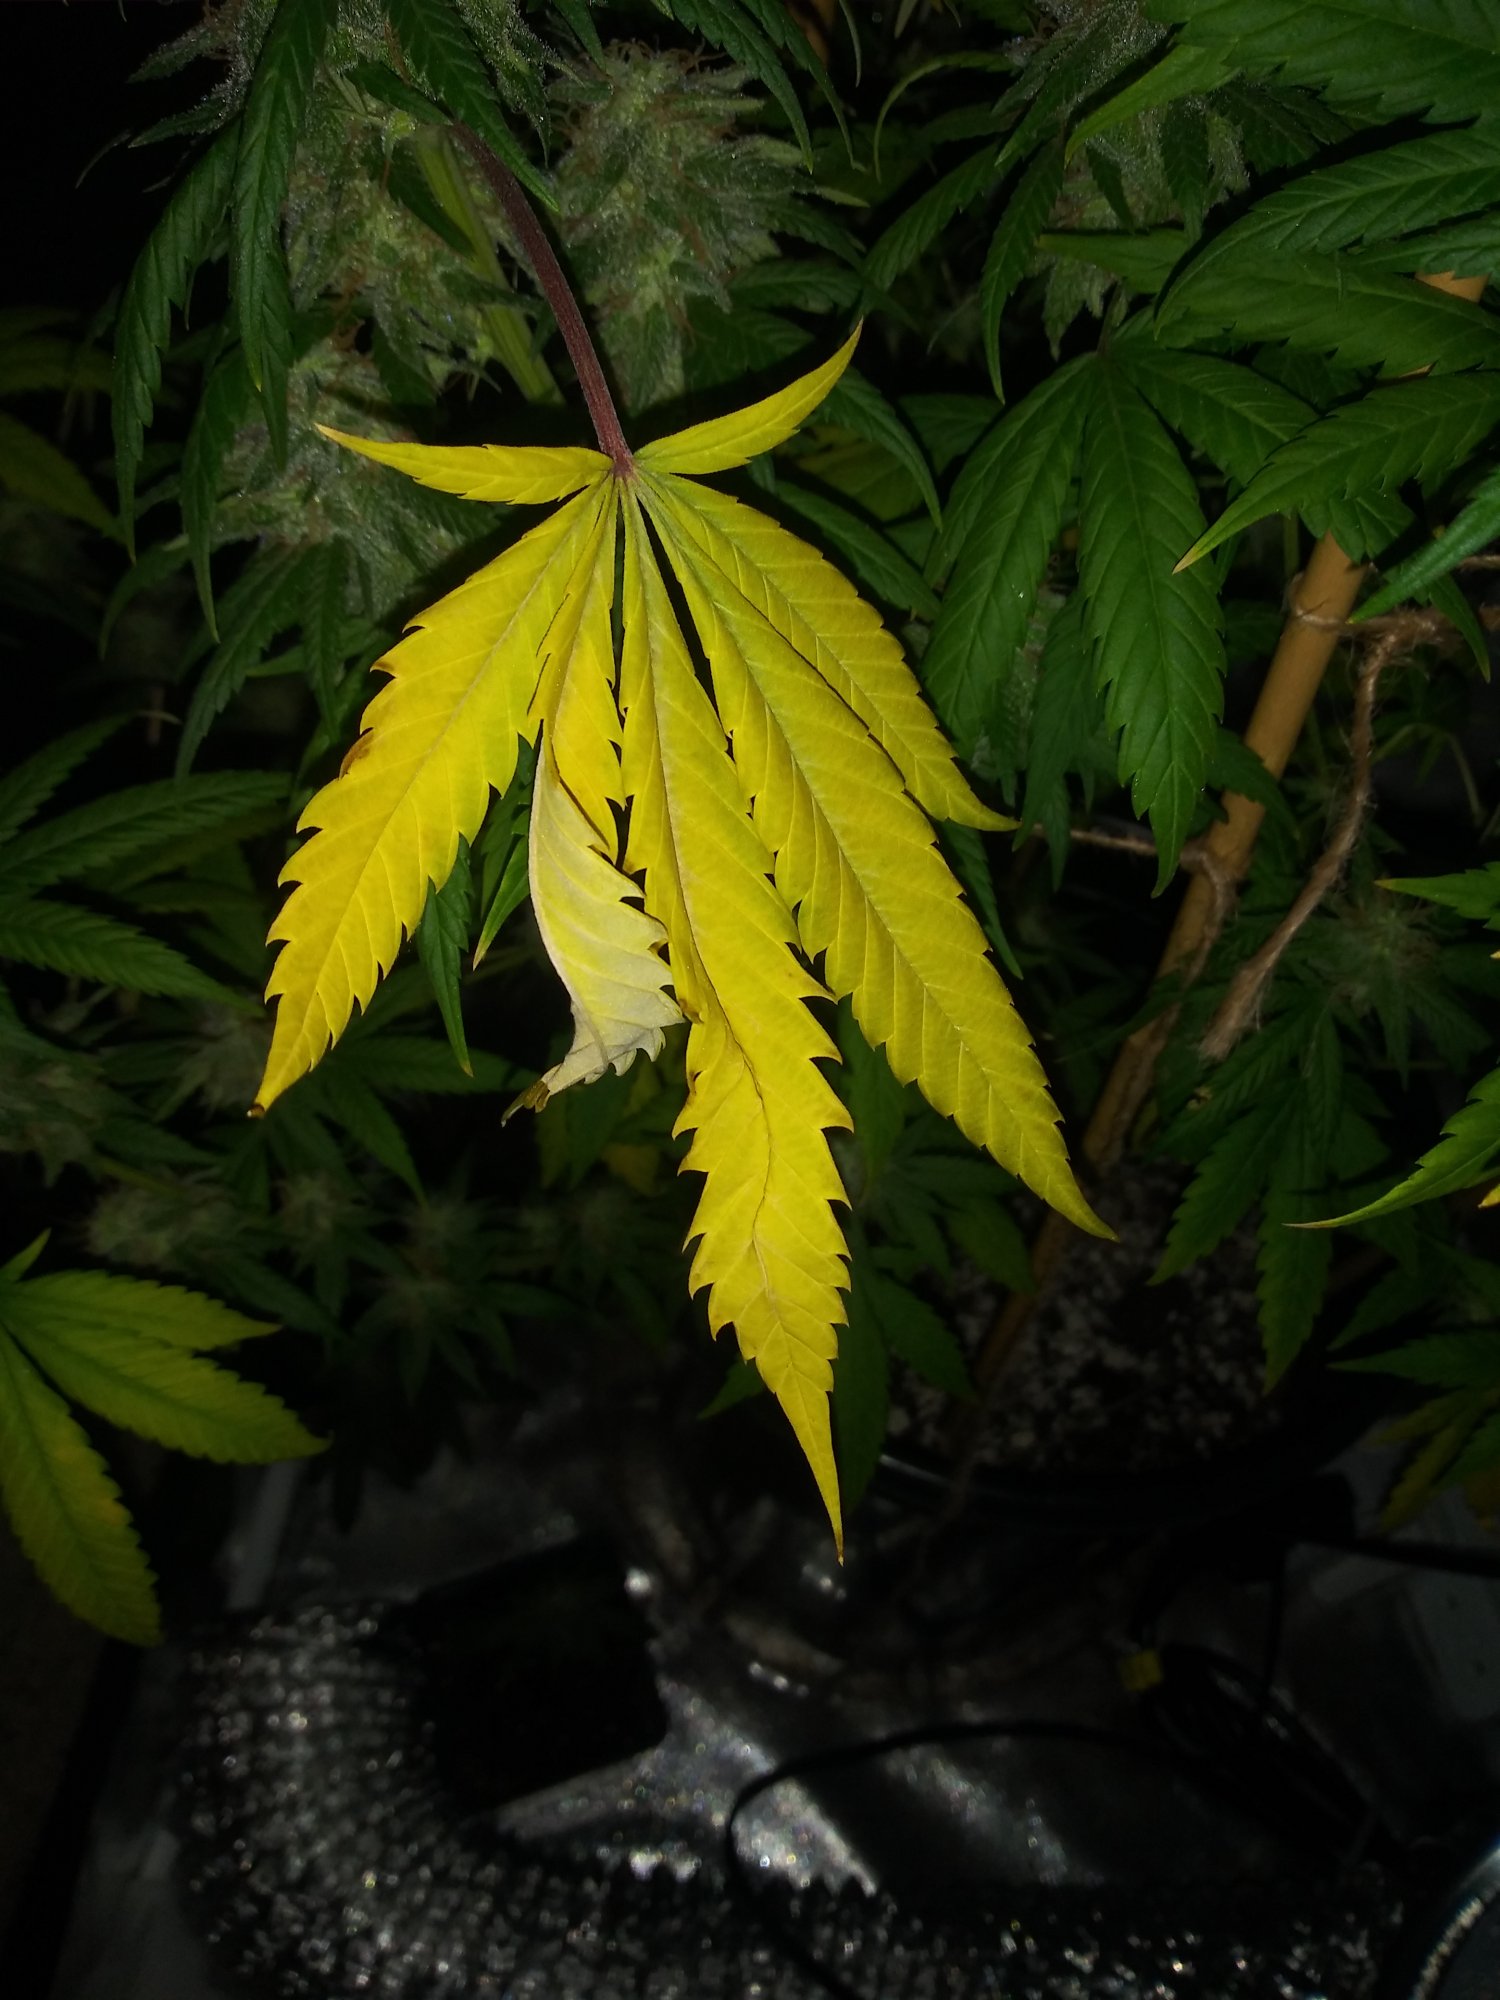 Whats causing issues yellow curling leaves